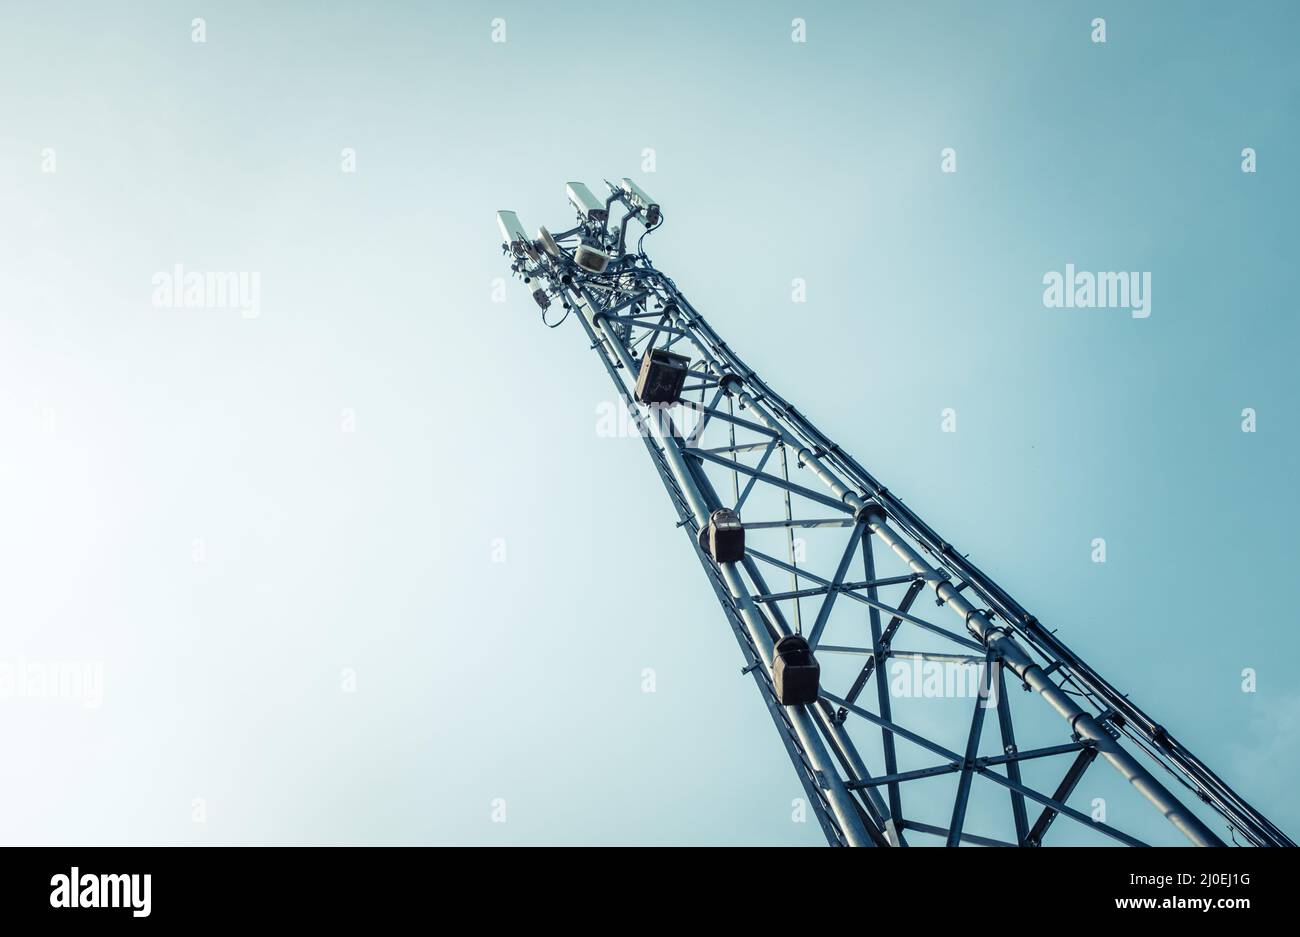 Telecommunications Or Cellphone Radio Tower Stock Photo